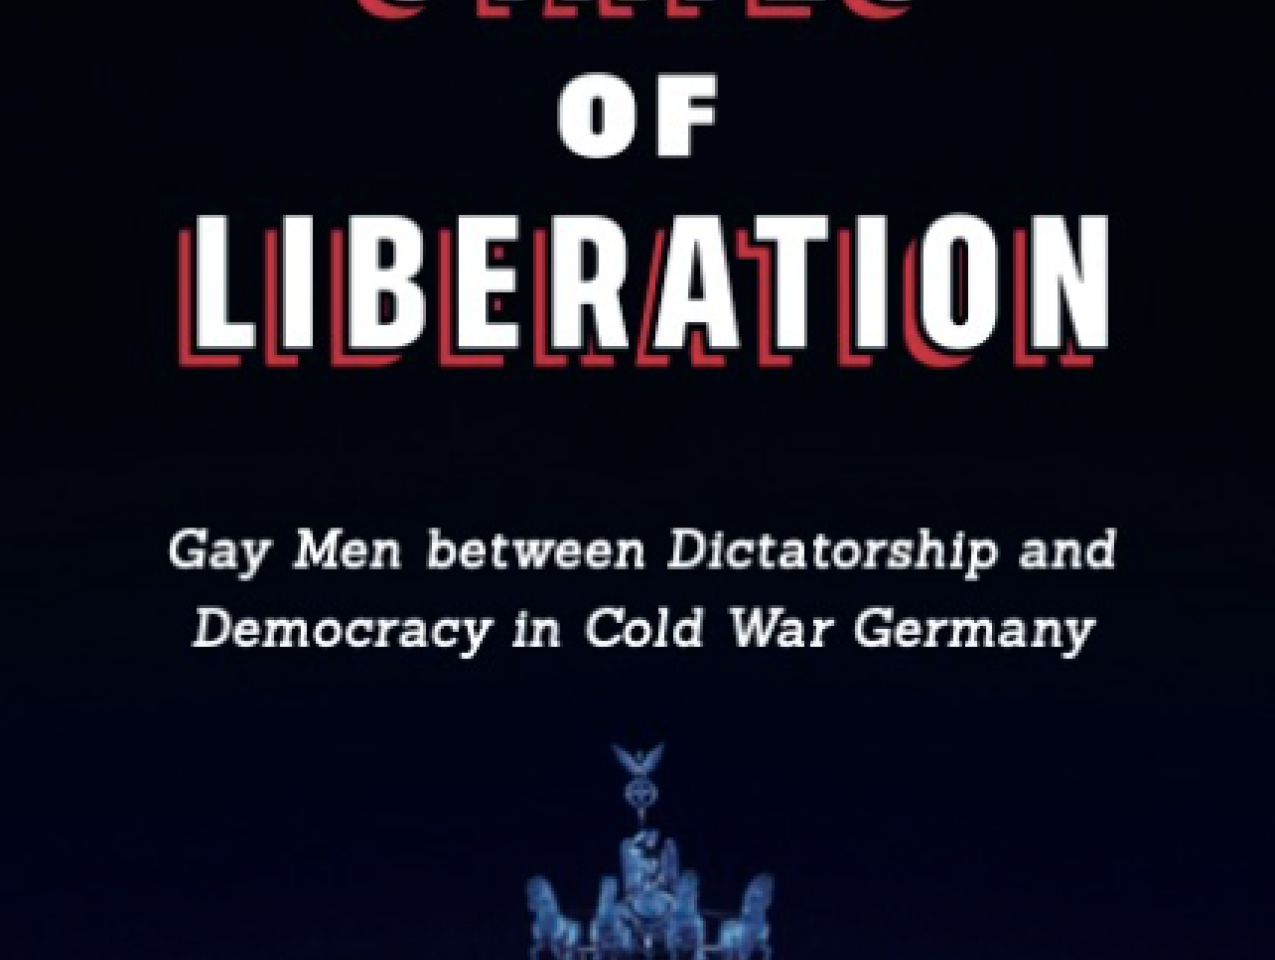 Image for Book Talk: States Of Liberation: Gay Men Between Dictatorship And Democracy In Cold War Germany